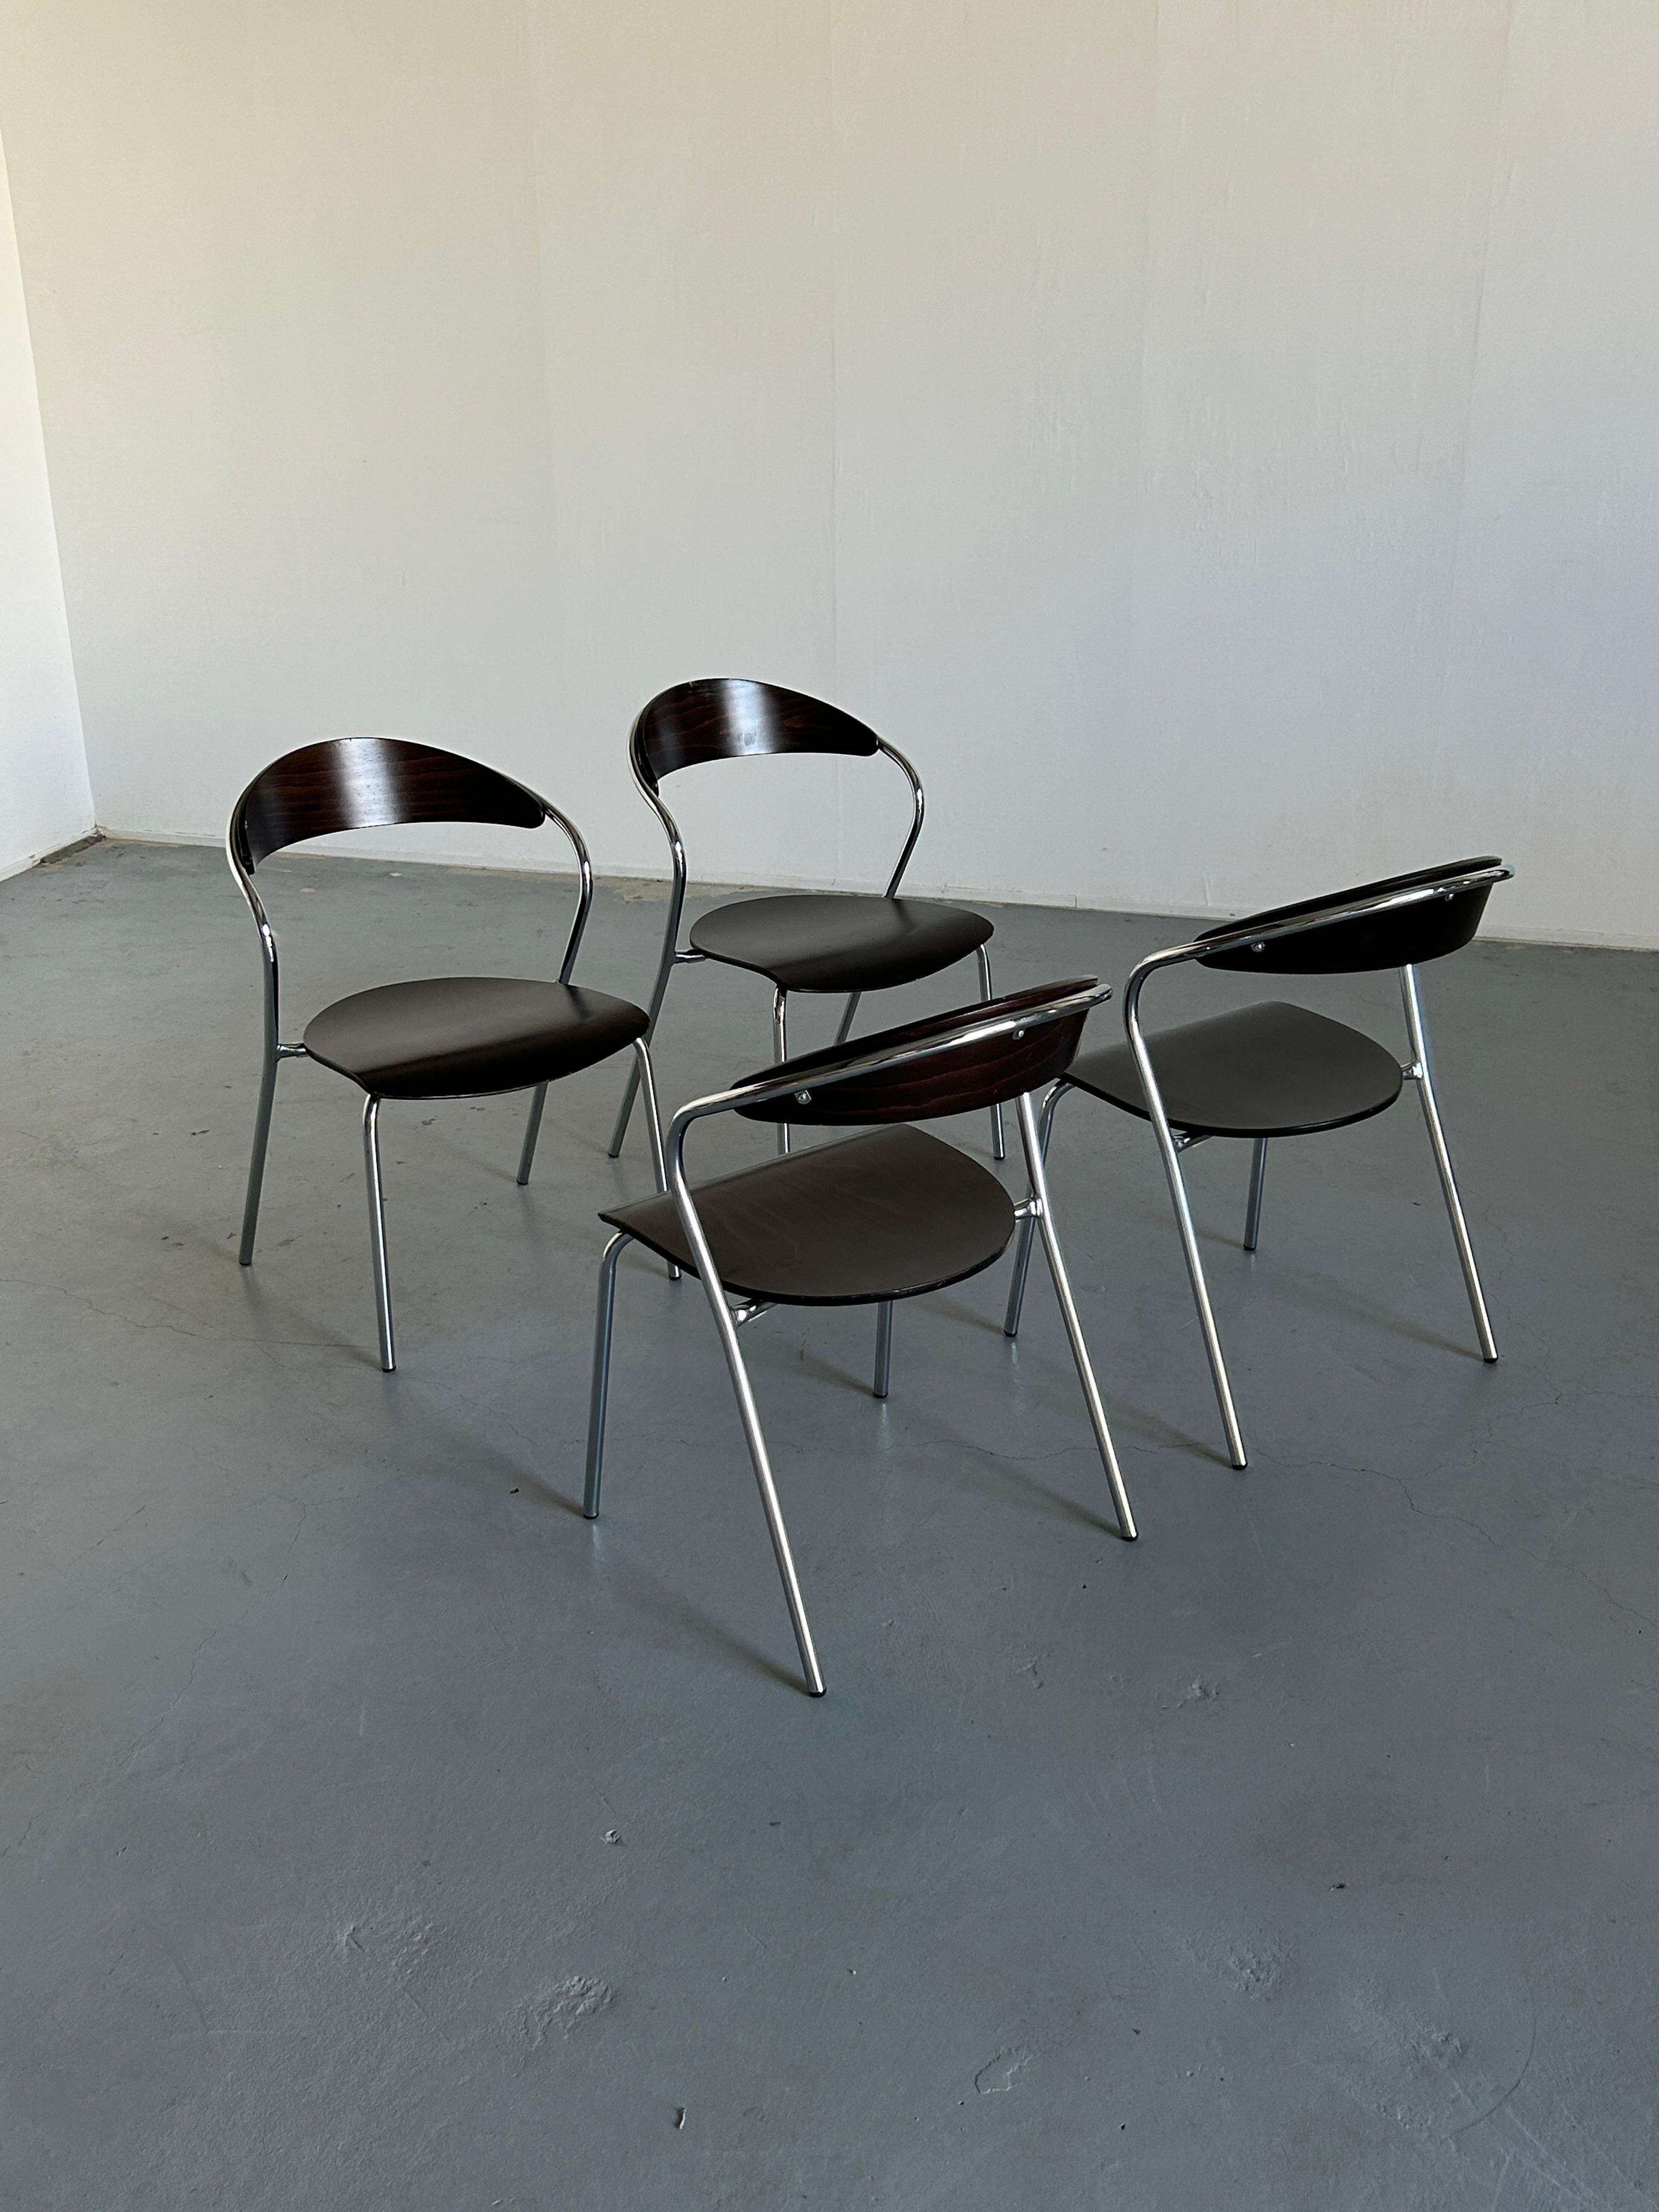 Set of four Italian postmodern dining chairs, made from chromed metal frame with a curved structure and plywood seat and backrest.
The design of the chair shows strong Italian postmodern influences.
Unique design, high quality materials and